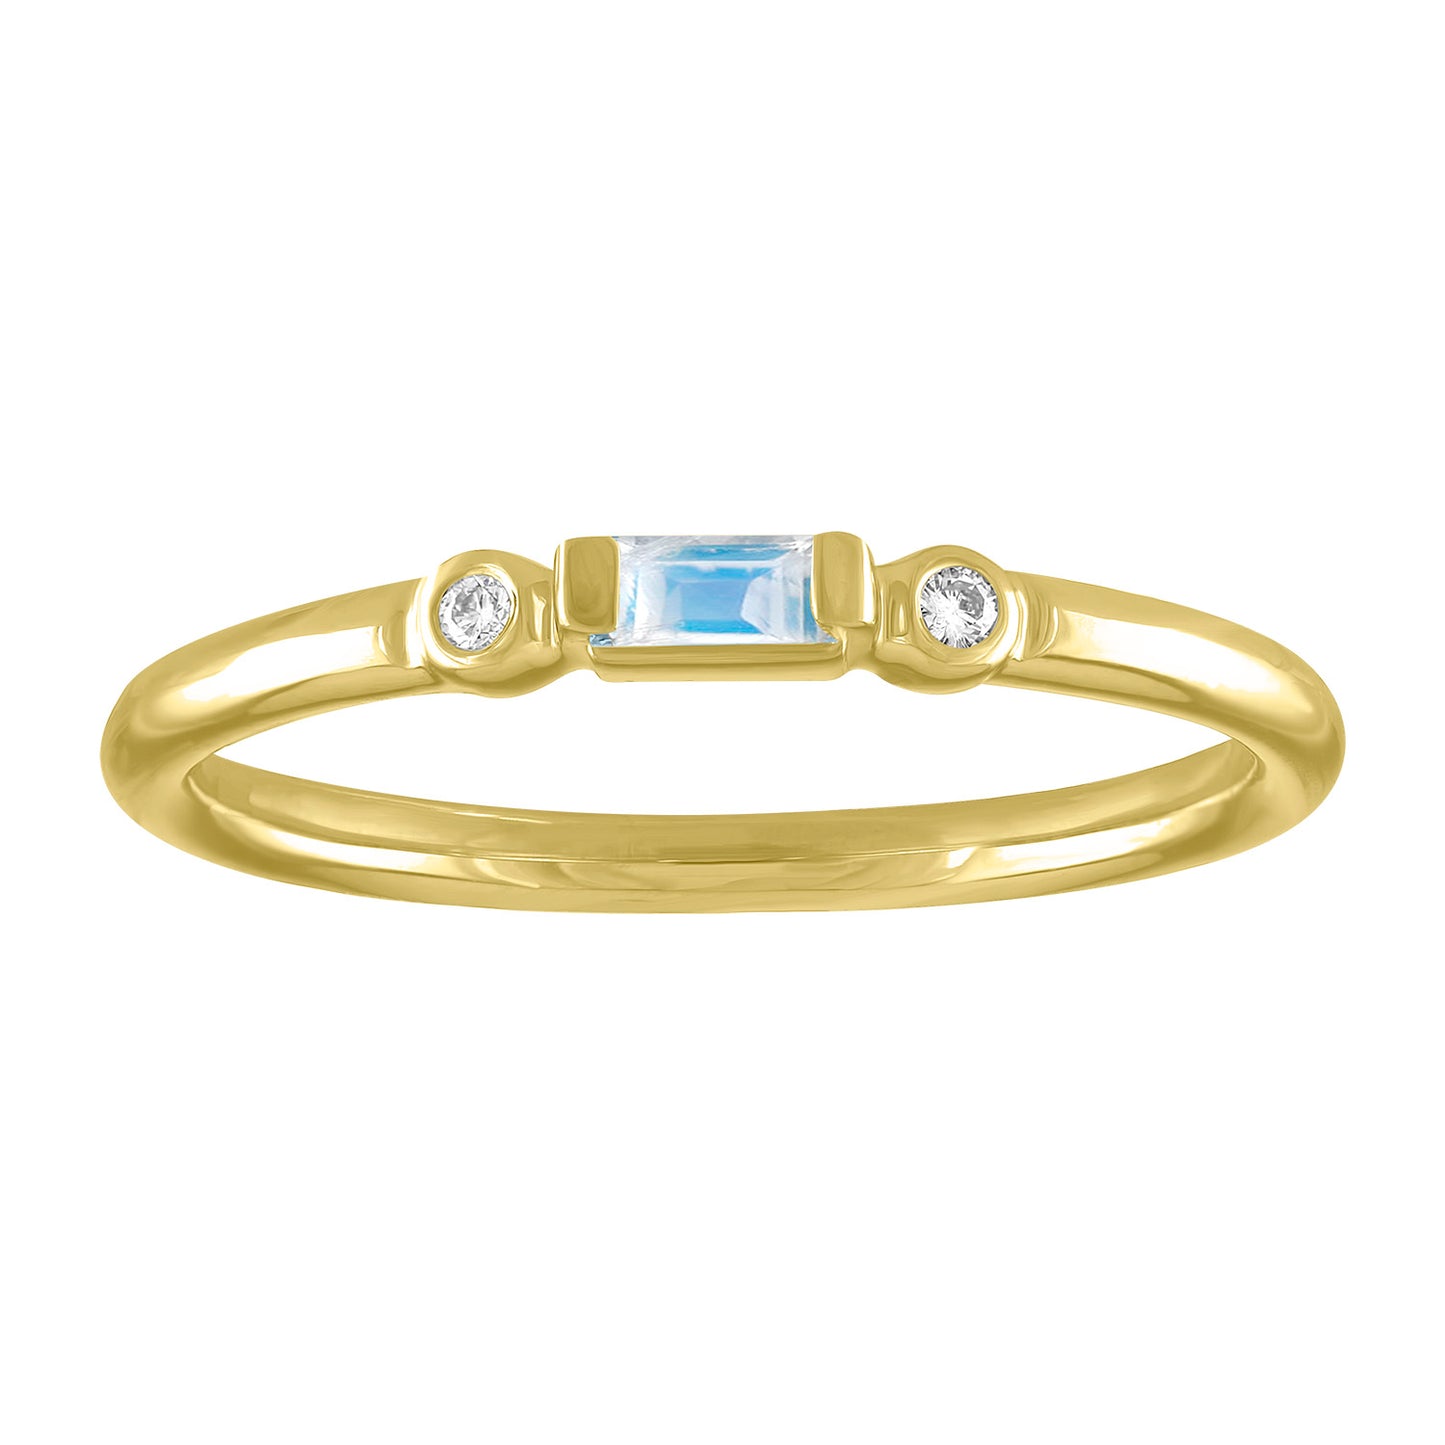 Yellow gold skinny band with a moonstone baguette in the center and two round diamonds on the side. 